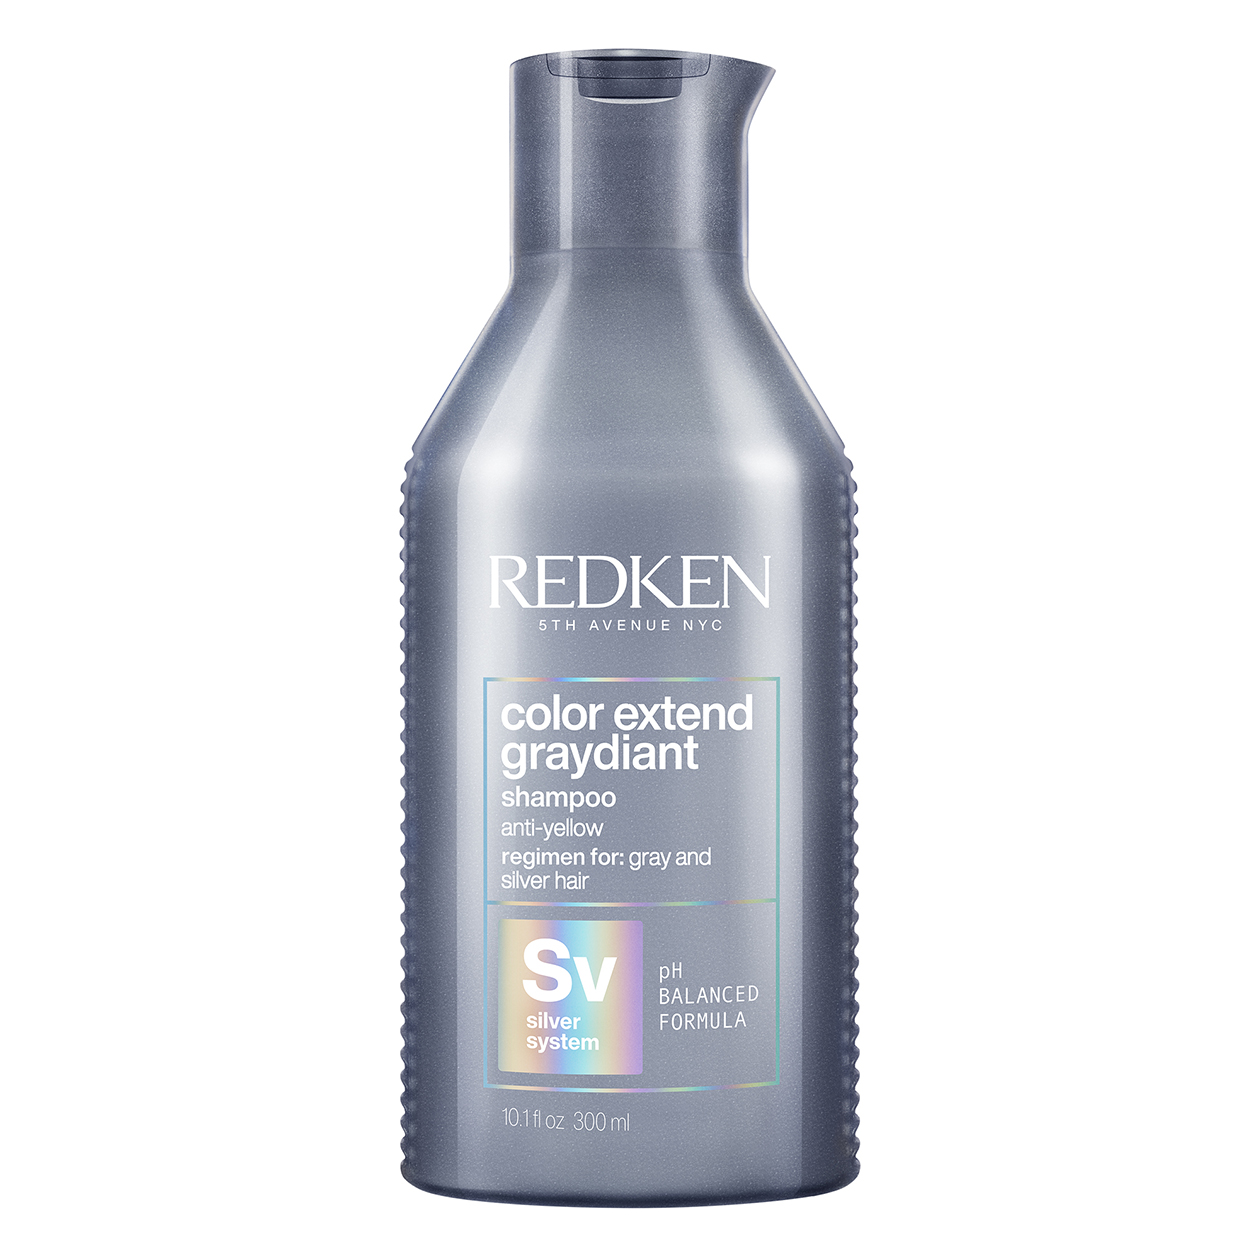 Redken Color Extend Graydiant Purple Shampoo | Hair Toner For Gray & Silver Hair | Tones & Strengthens Hair 33.8 Fl Oz (Pack of 1)